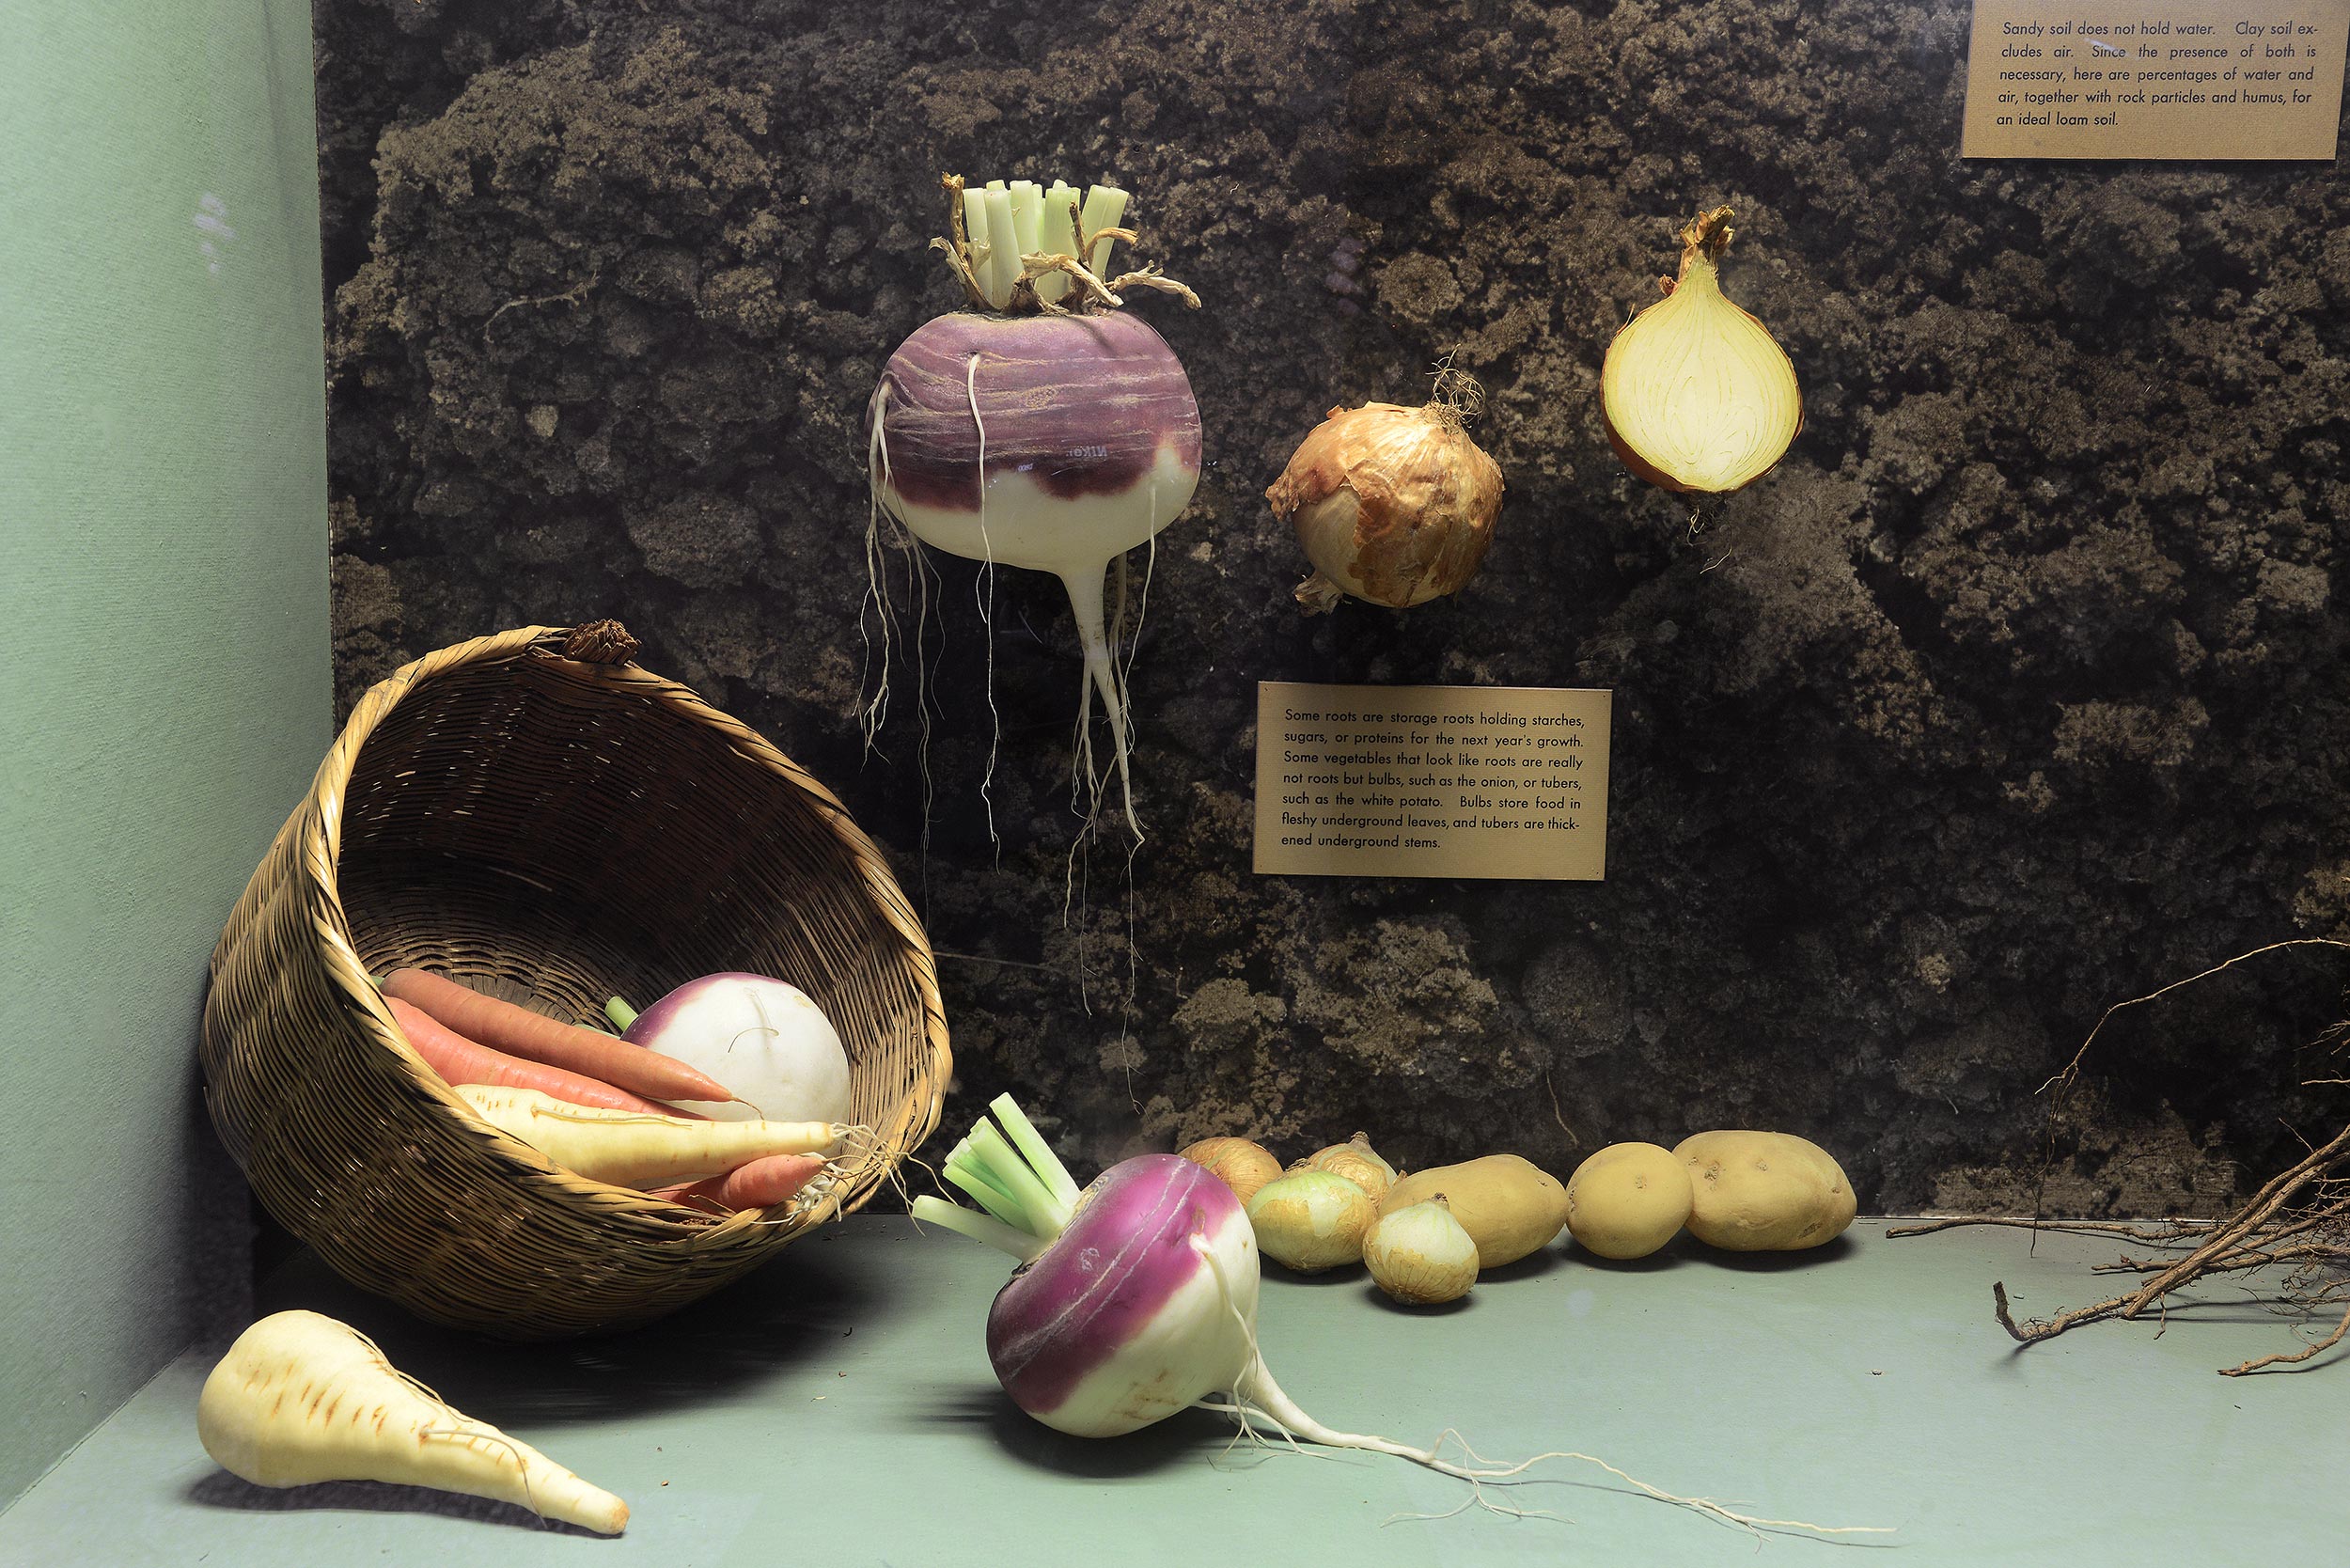 Section of a museum case showing a variety of tubers, including carrots, potatoes and others.